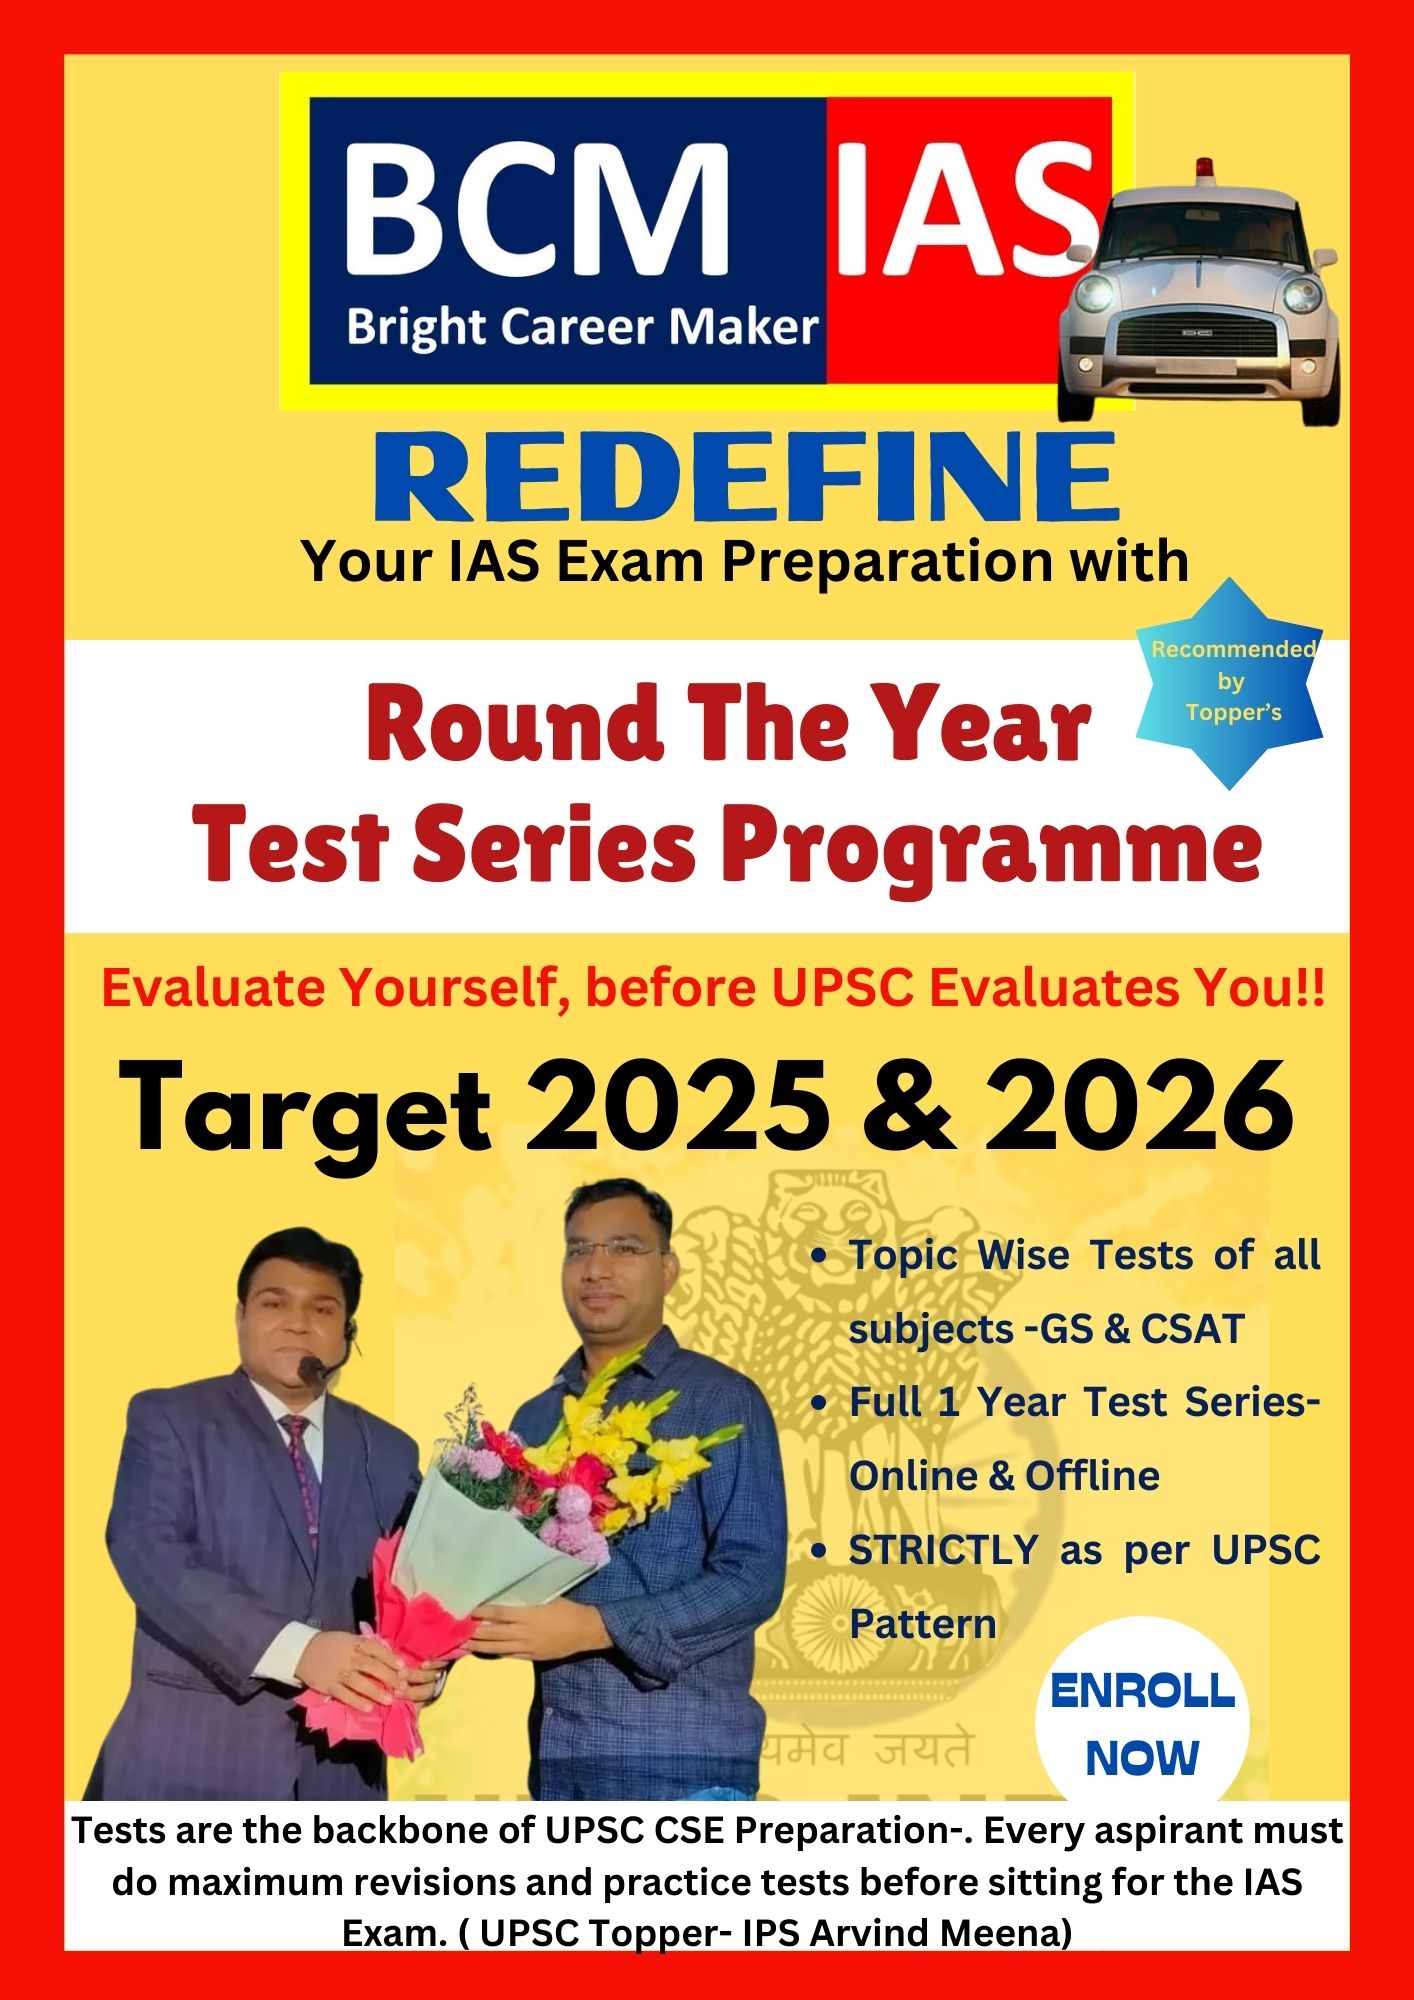 Round The Year Test Series Programme-52 Tests for GS & CSAT - offered by Bright IAS Career Maker Faridabad